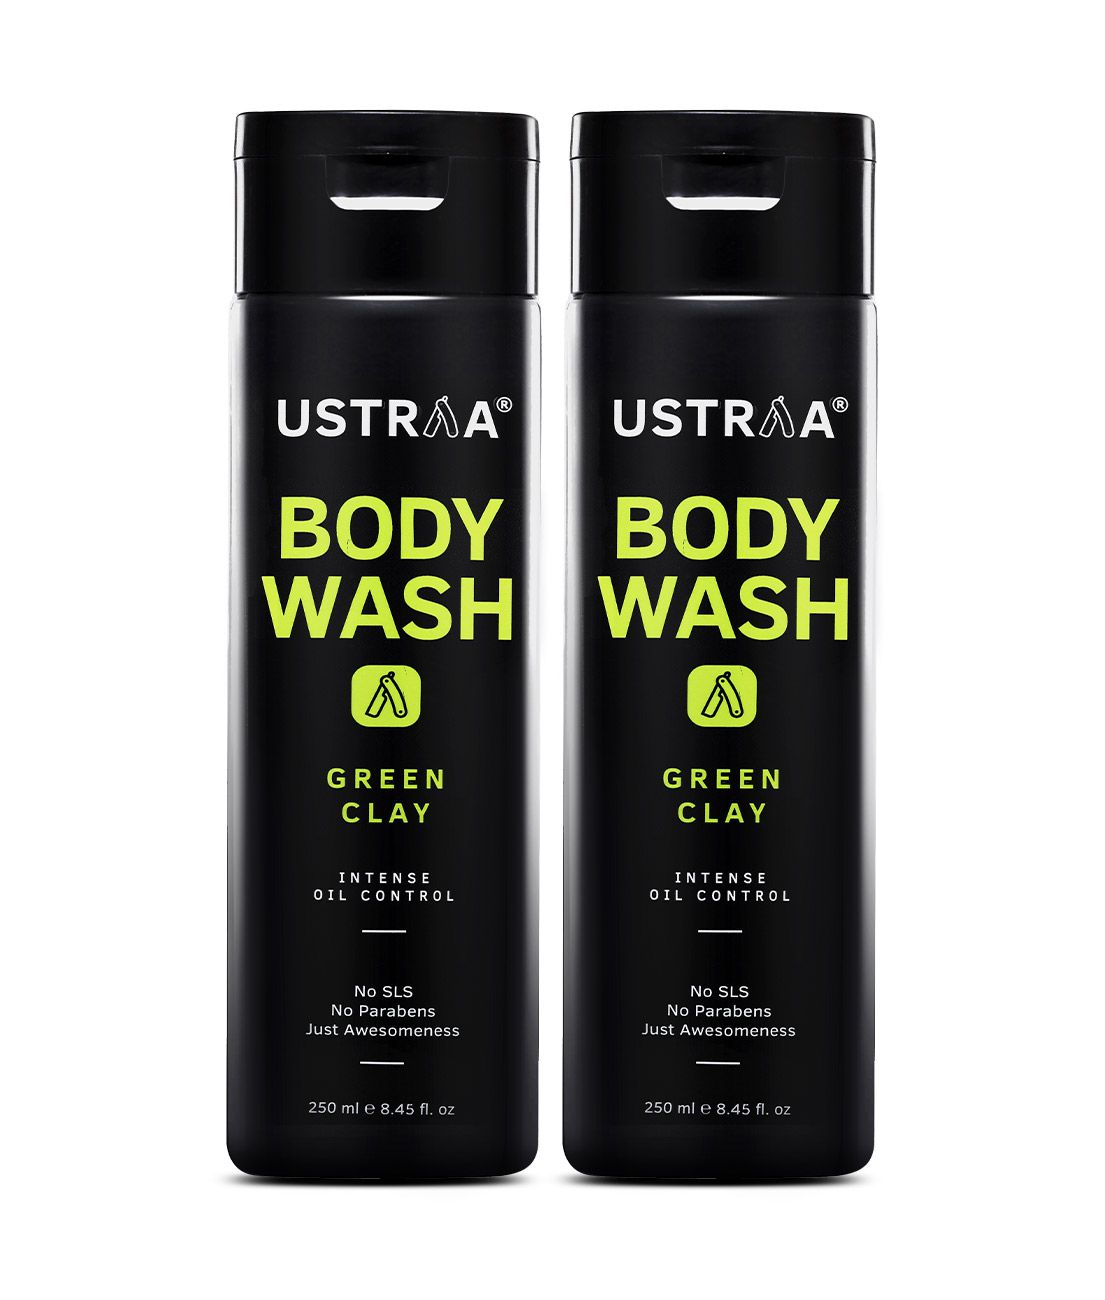     			Ustraa Body Wash-Green Clay - 200 ml (Pack of 2)